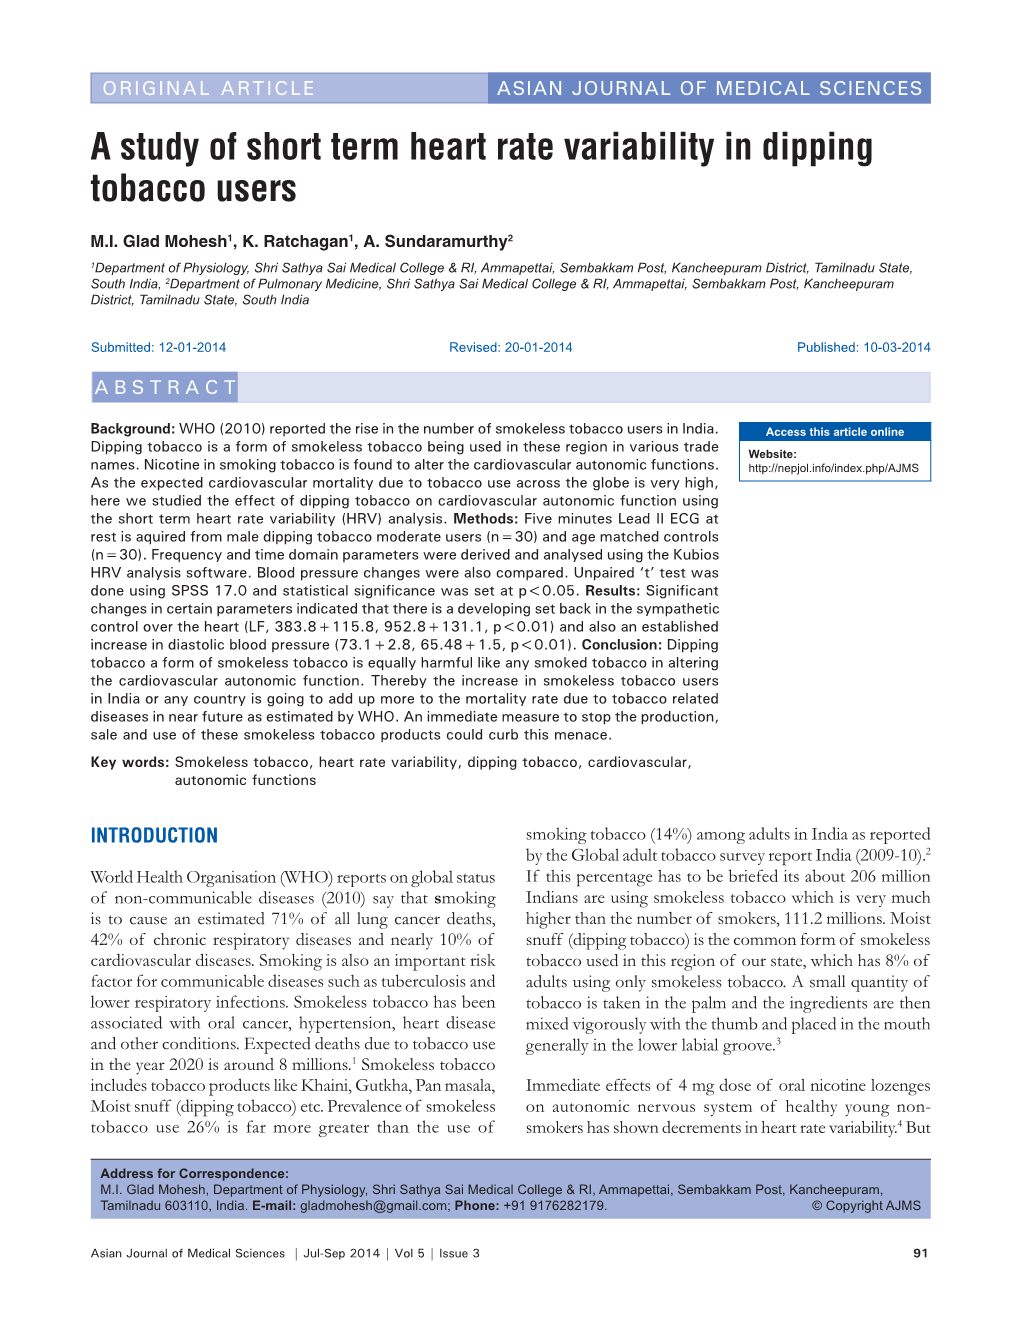 A Study of Short Term Heart Rate Variability in Dipping Tobacco Users